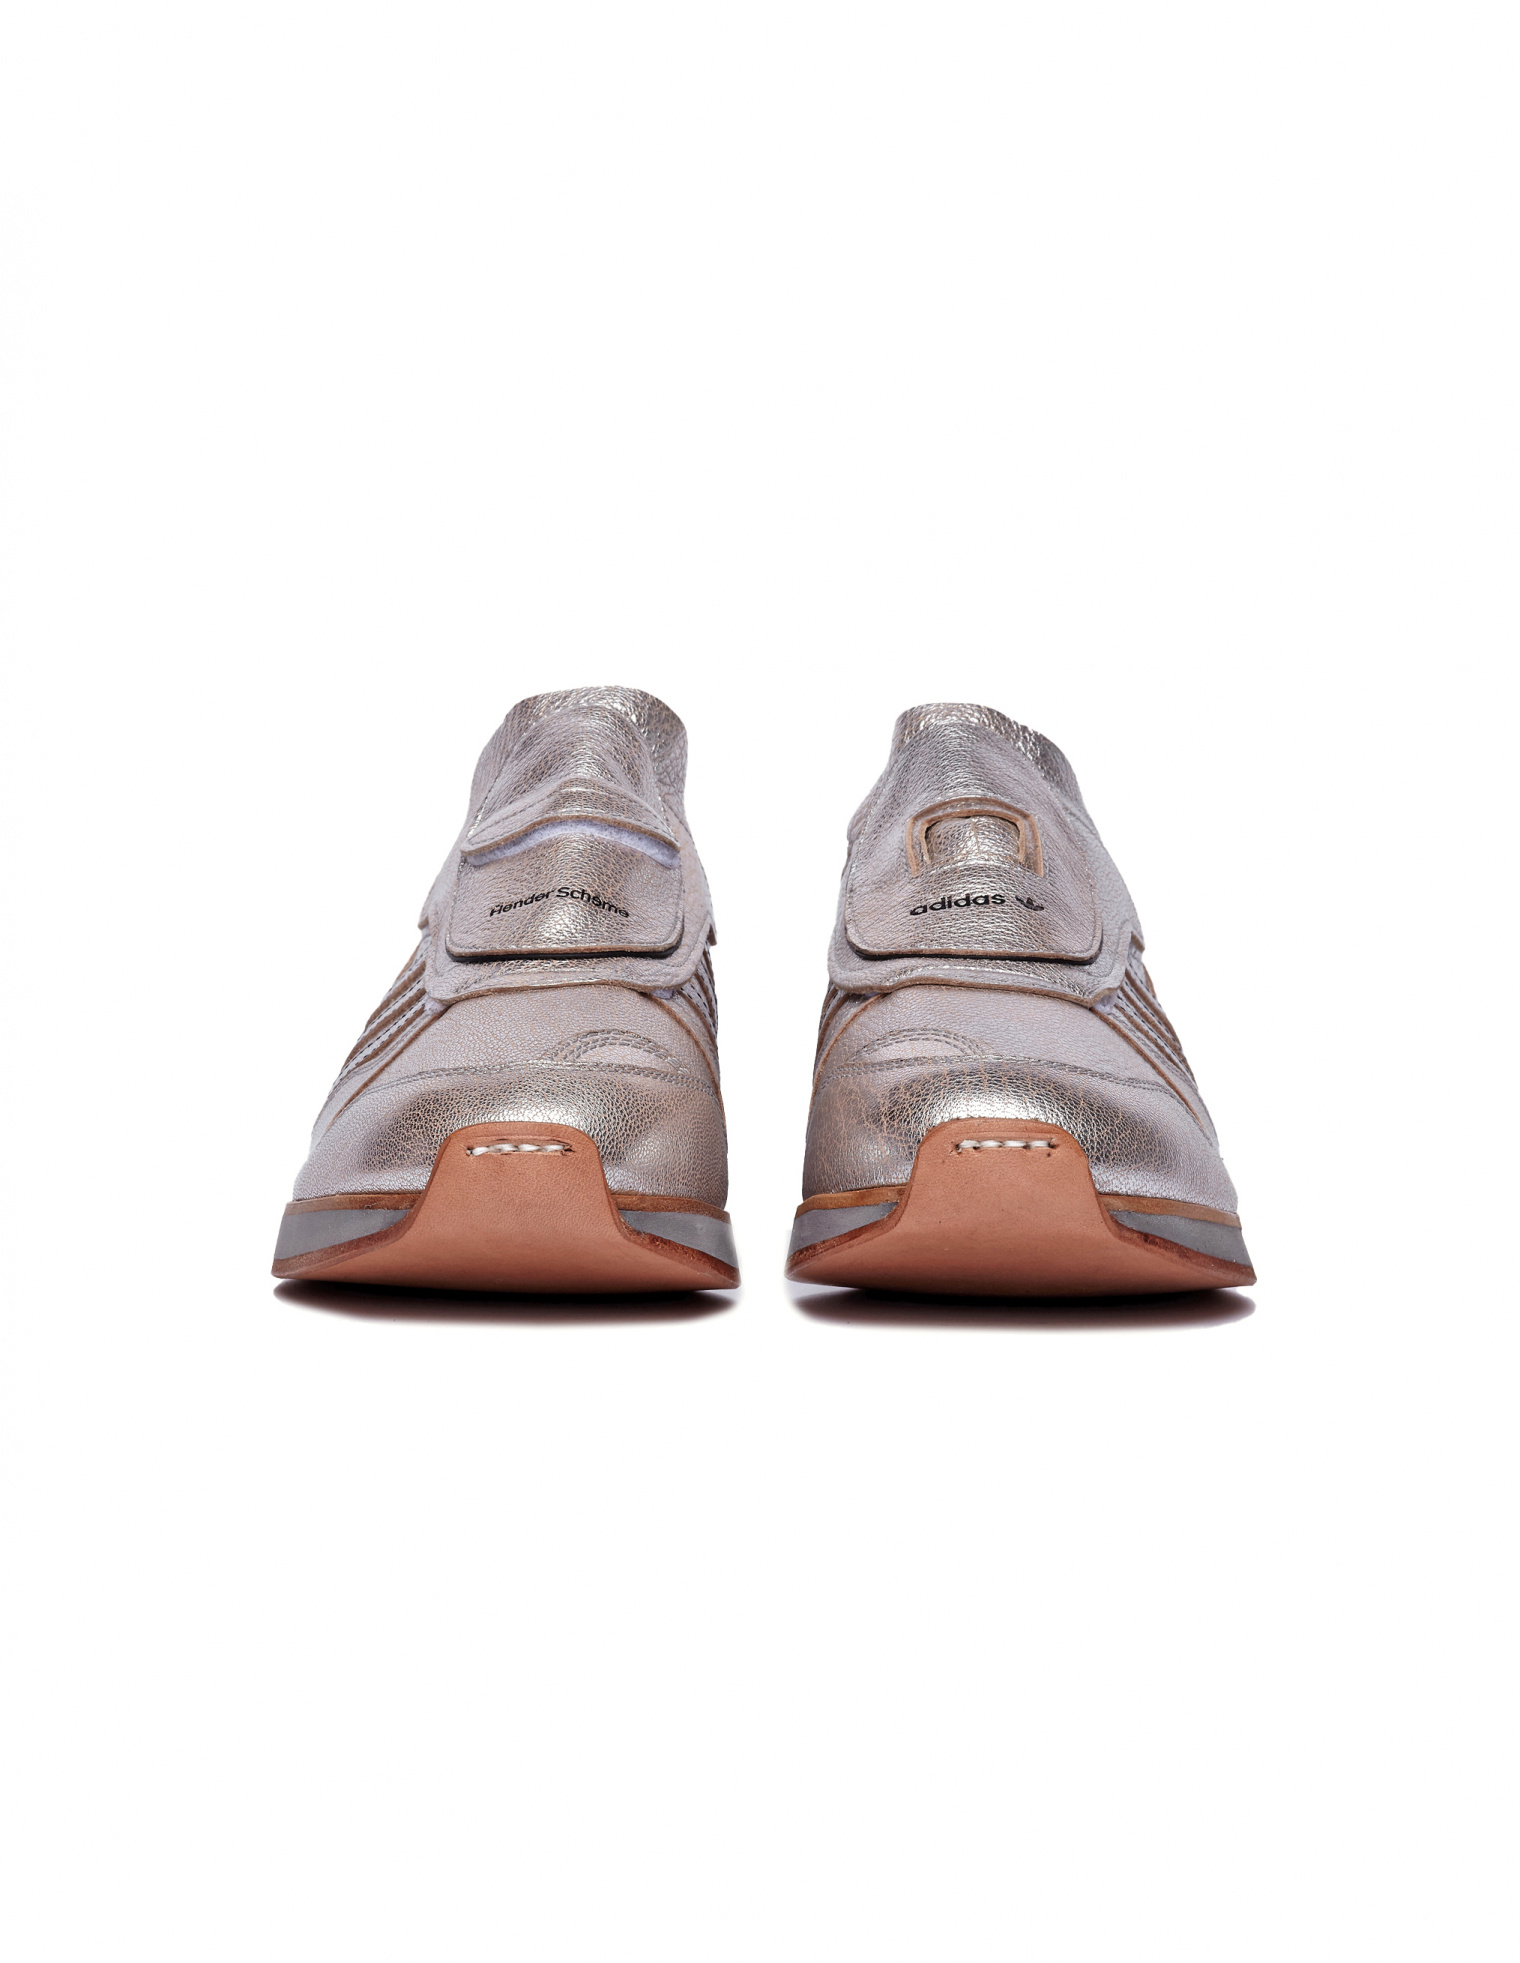 Hender Scheme adidas Micropacer Silver Leather Sneakers